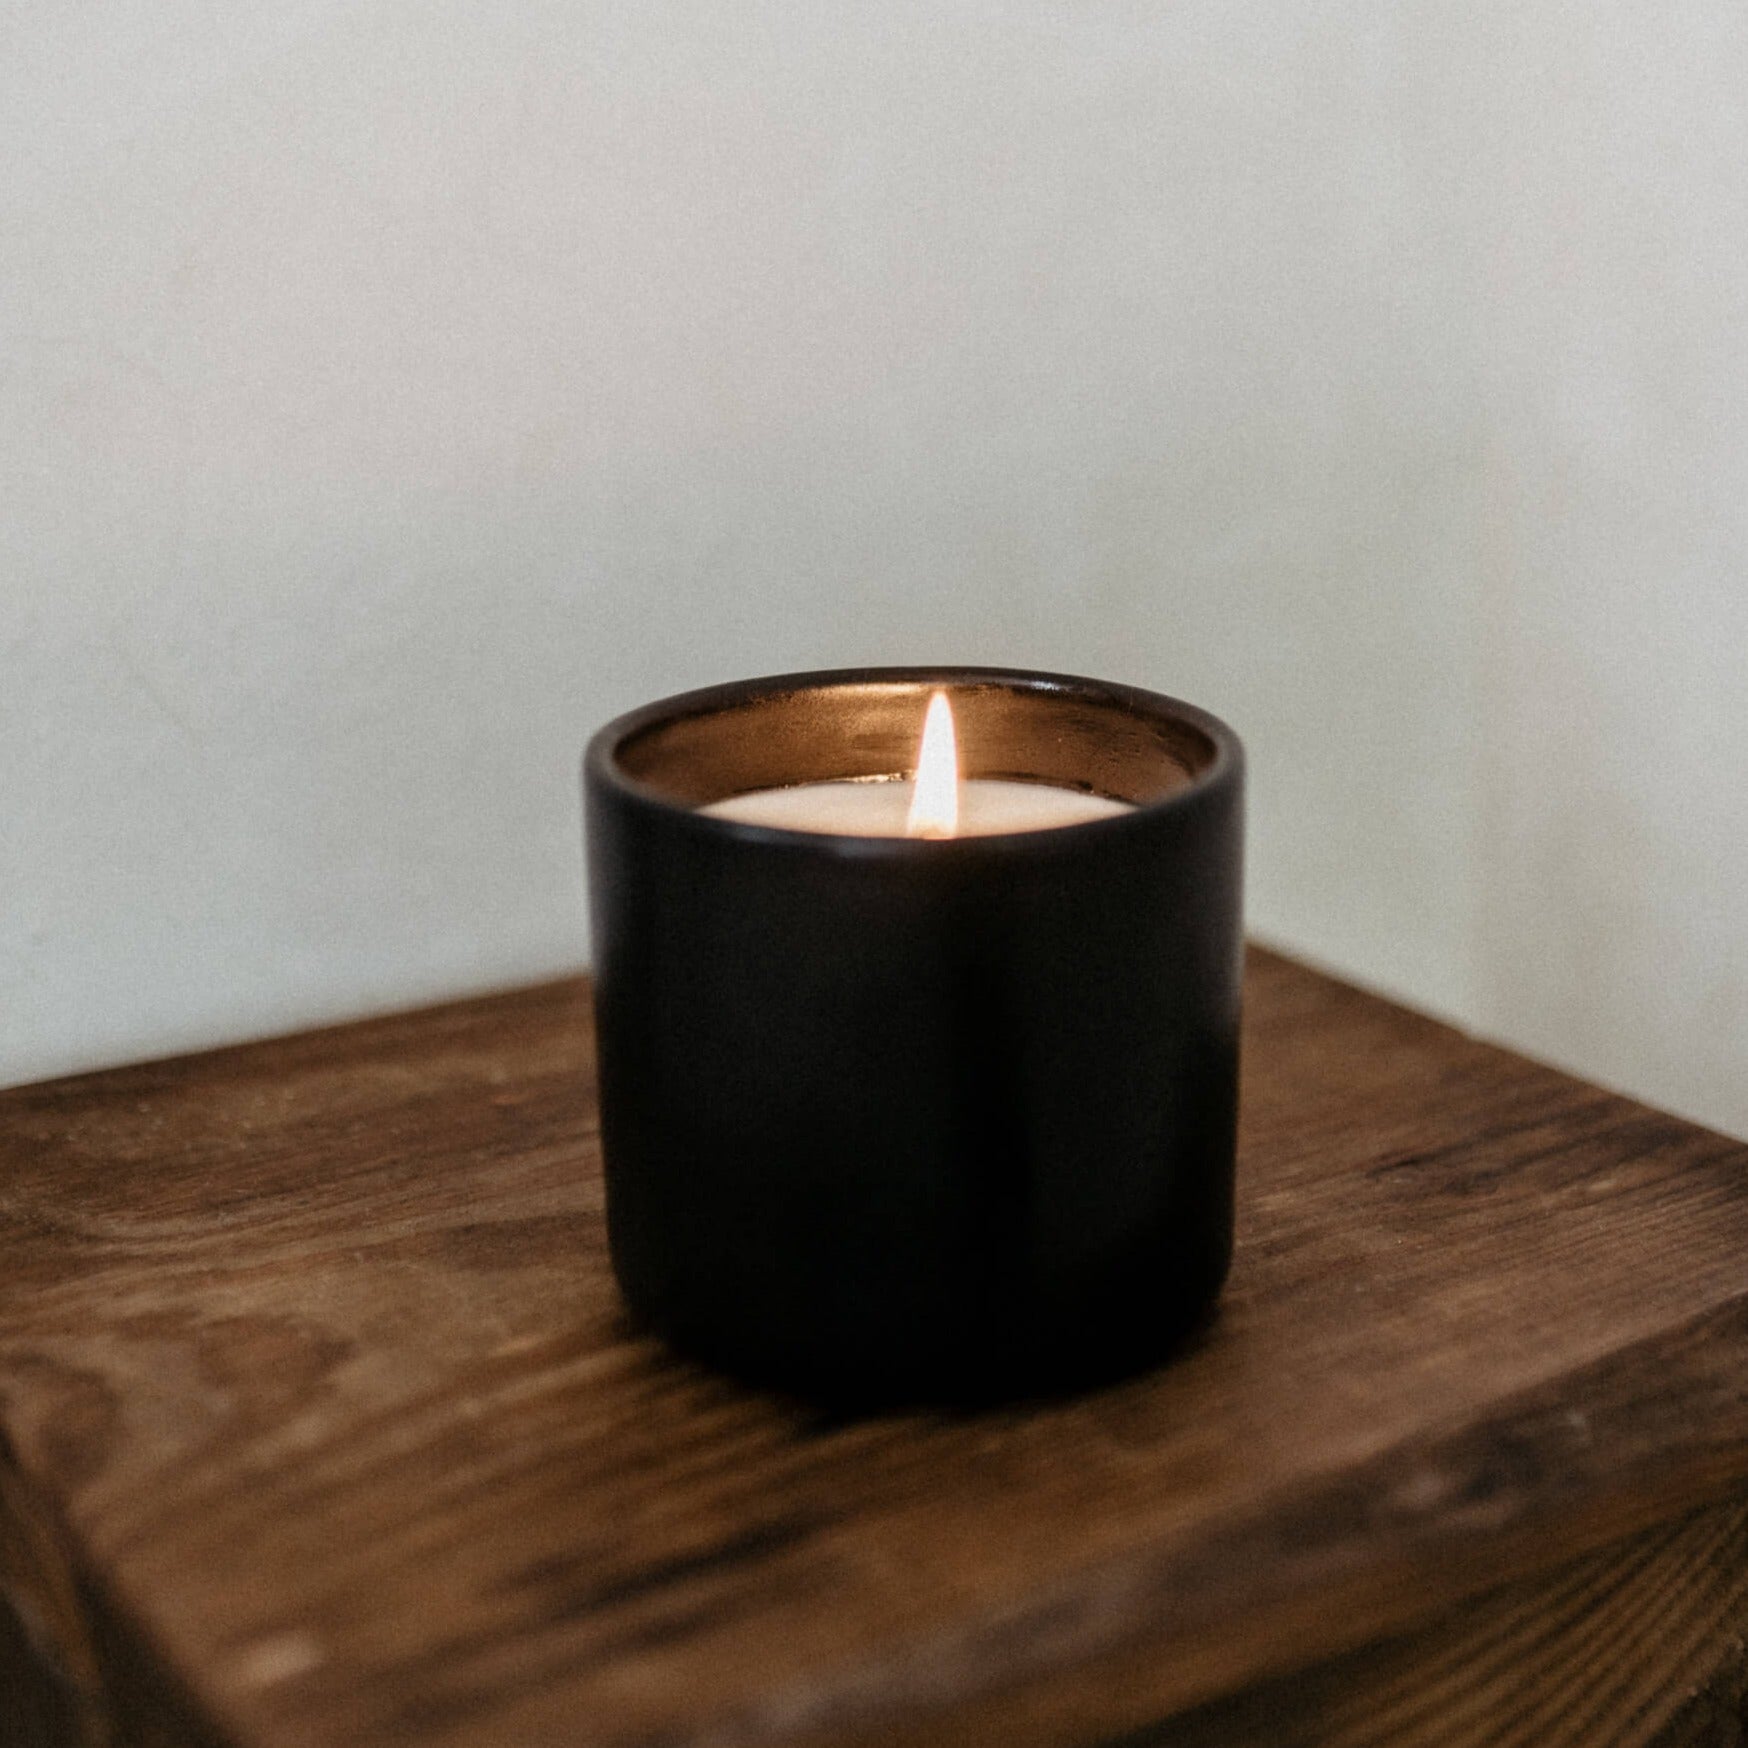 Black ceramic candle on a wood table lit.